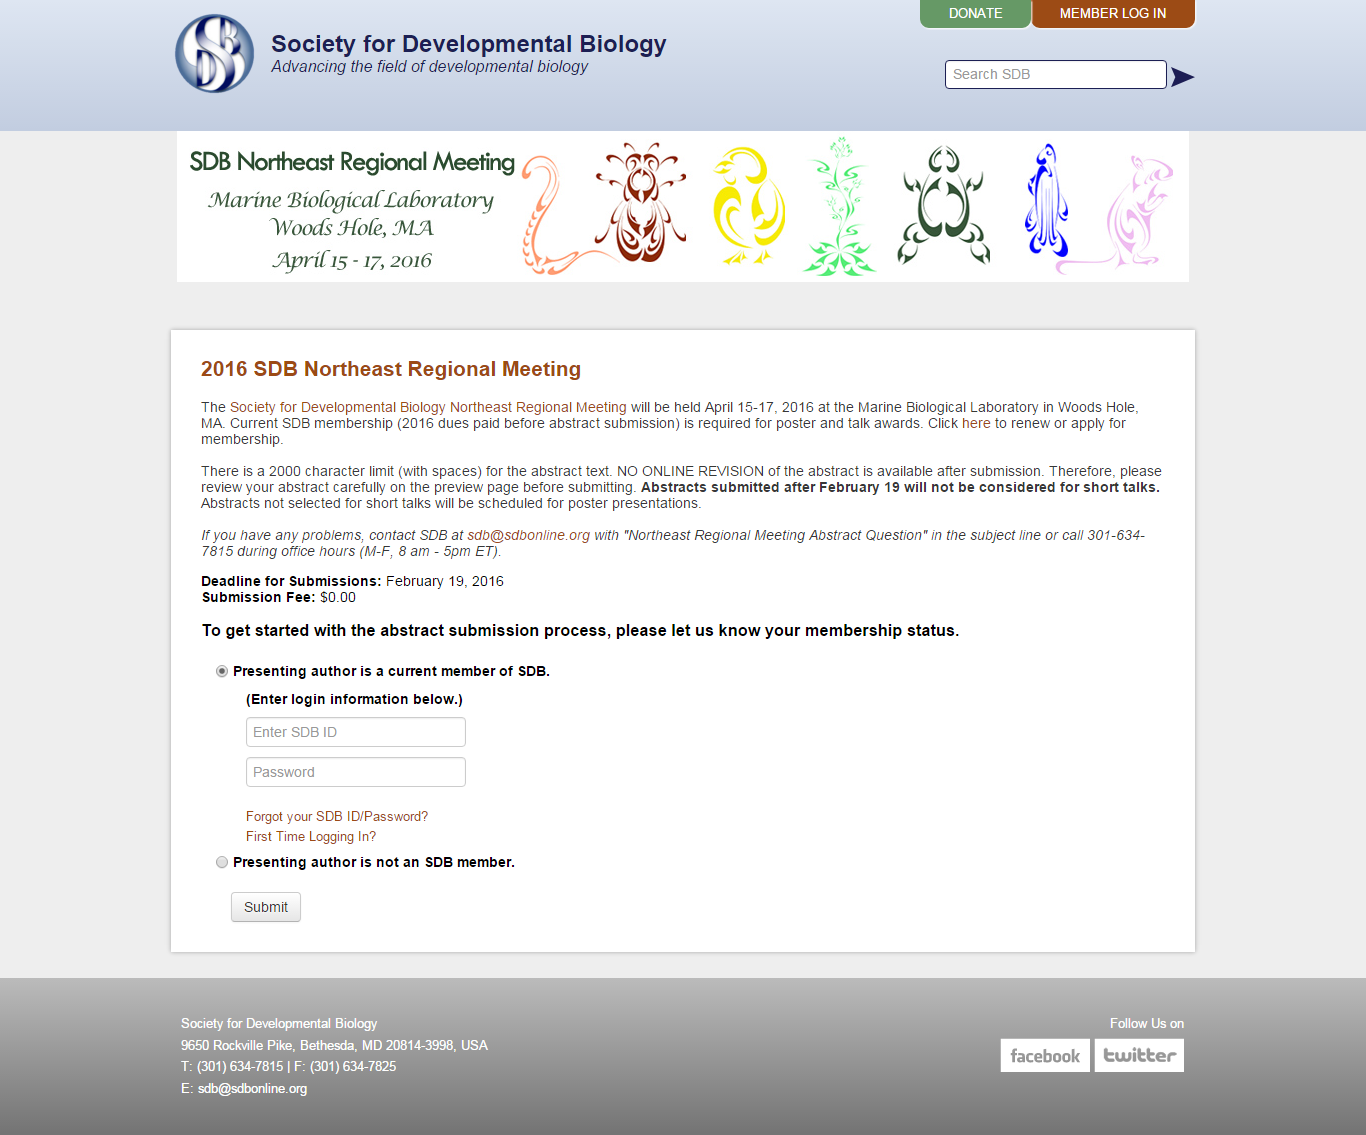 SDB website manages scientific abstract submissions